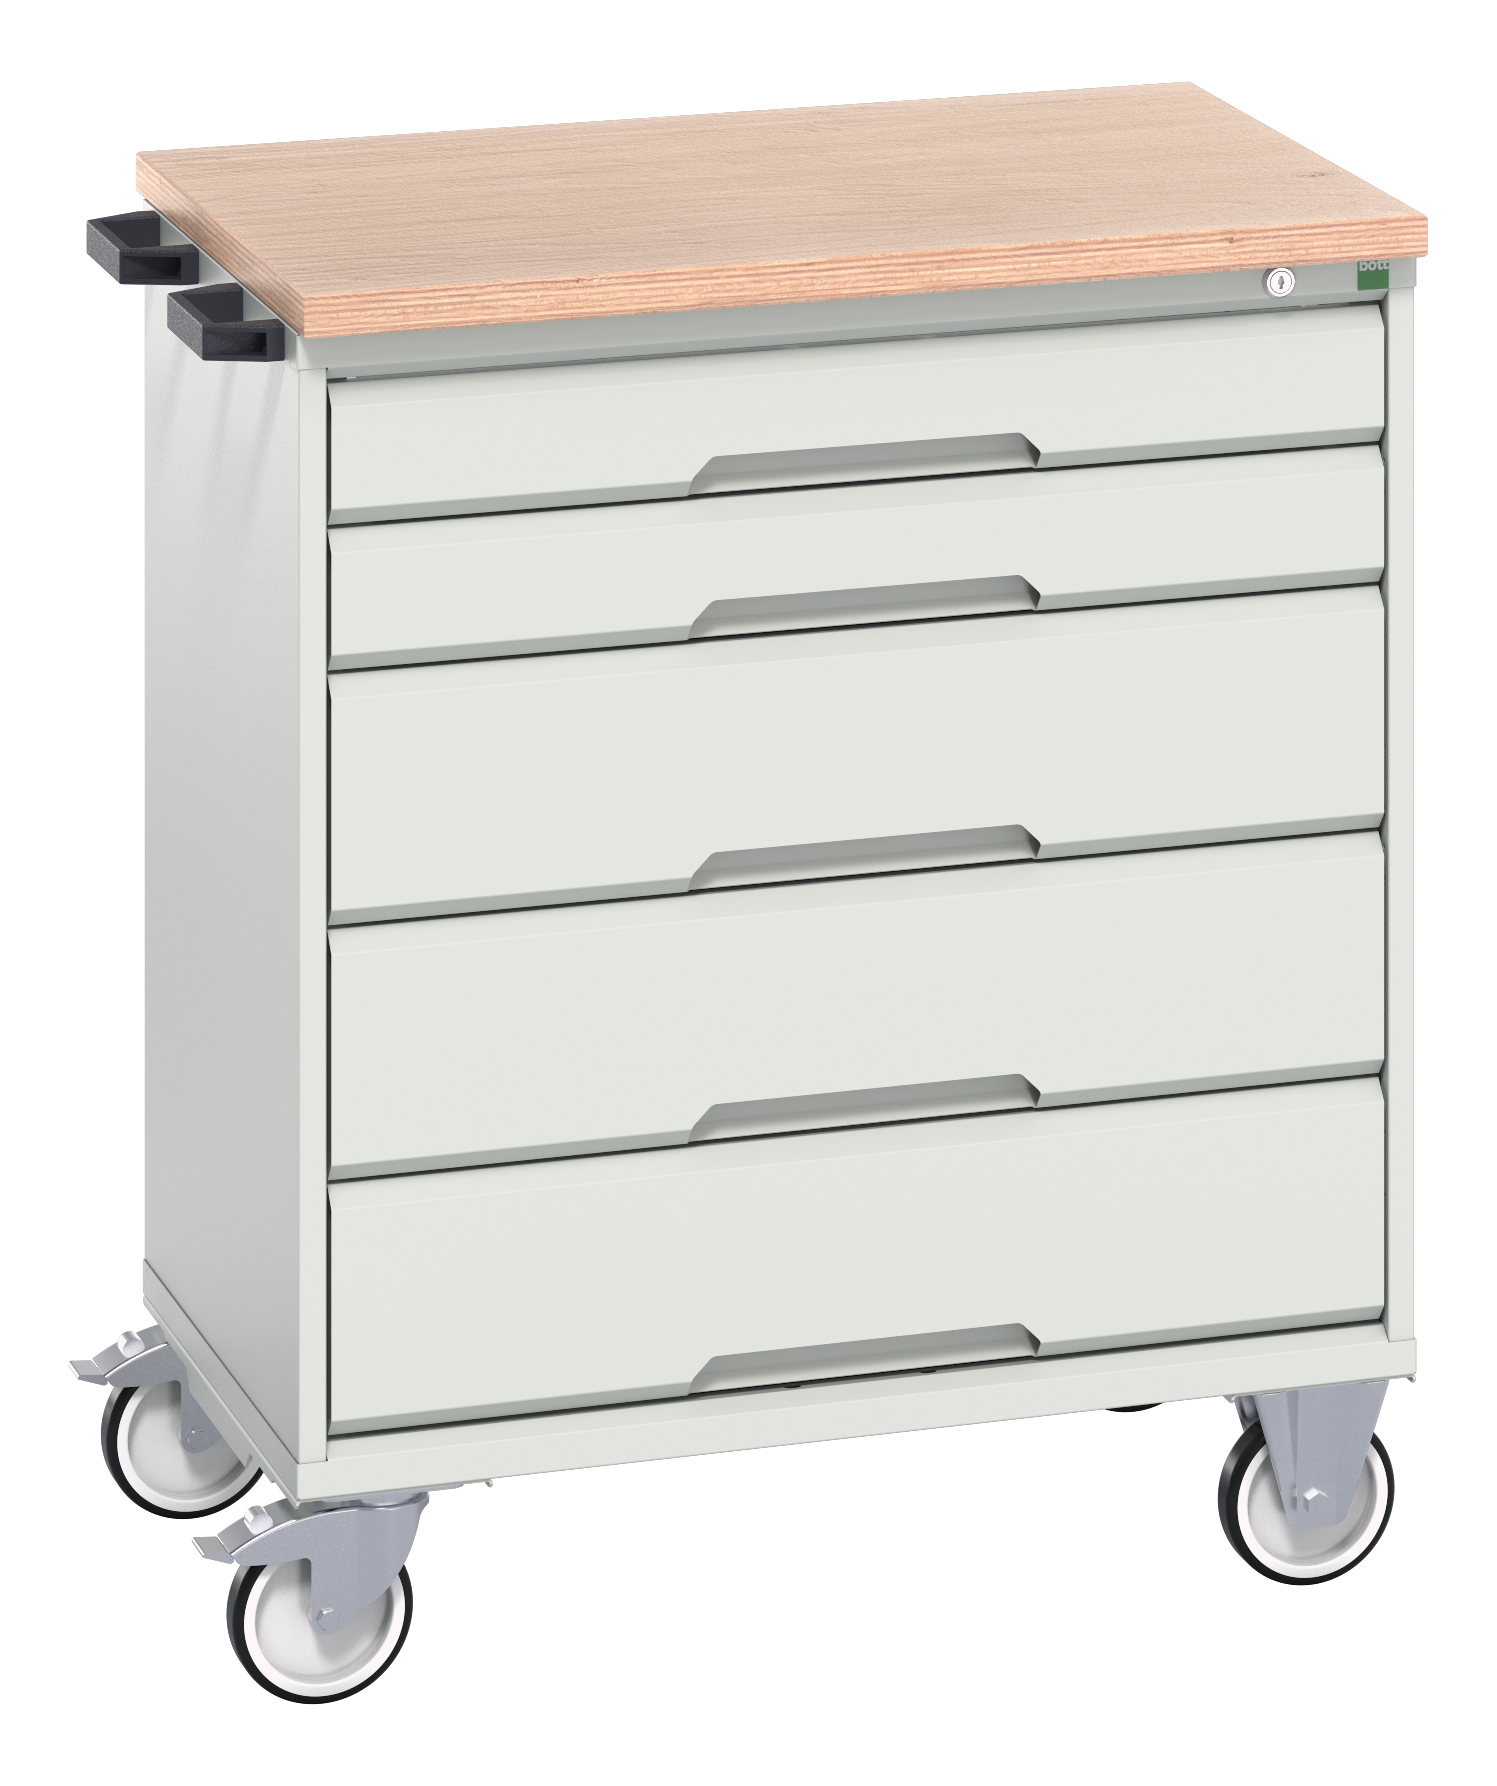 Bott Verso Mobile Drawer Cabinet With 5 Drawers & Multiplex Top - 16927001.16